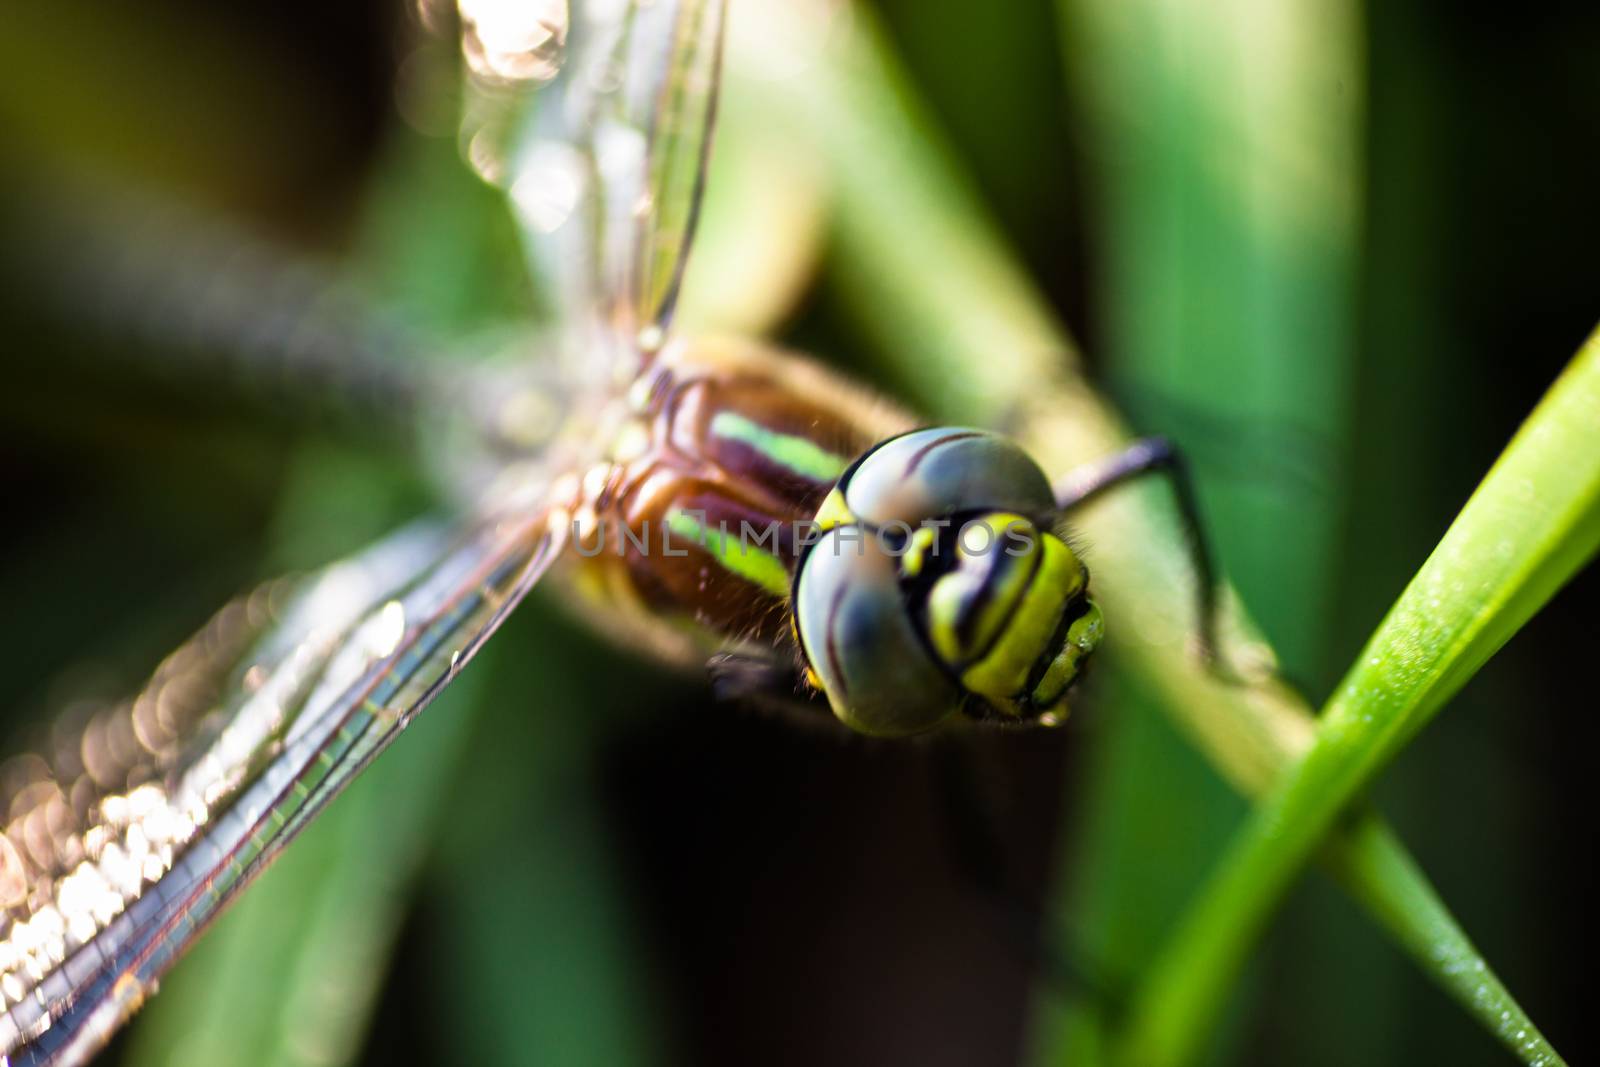 Closeup of the dragonfly sitting on the green grass